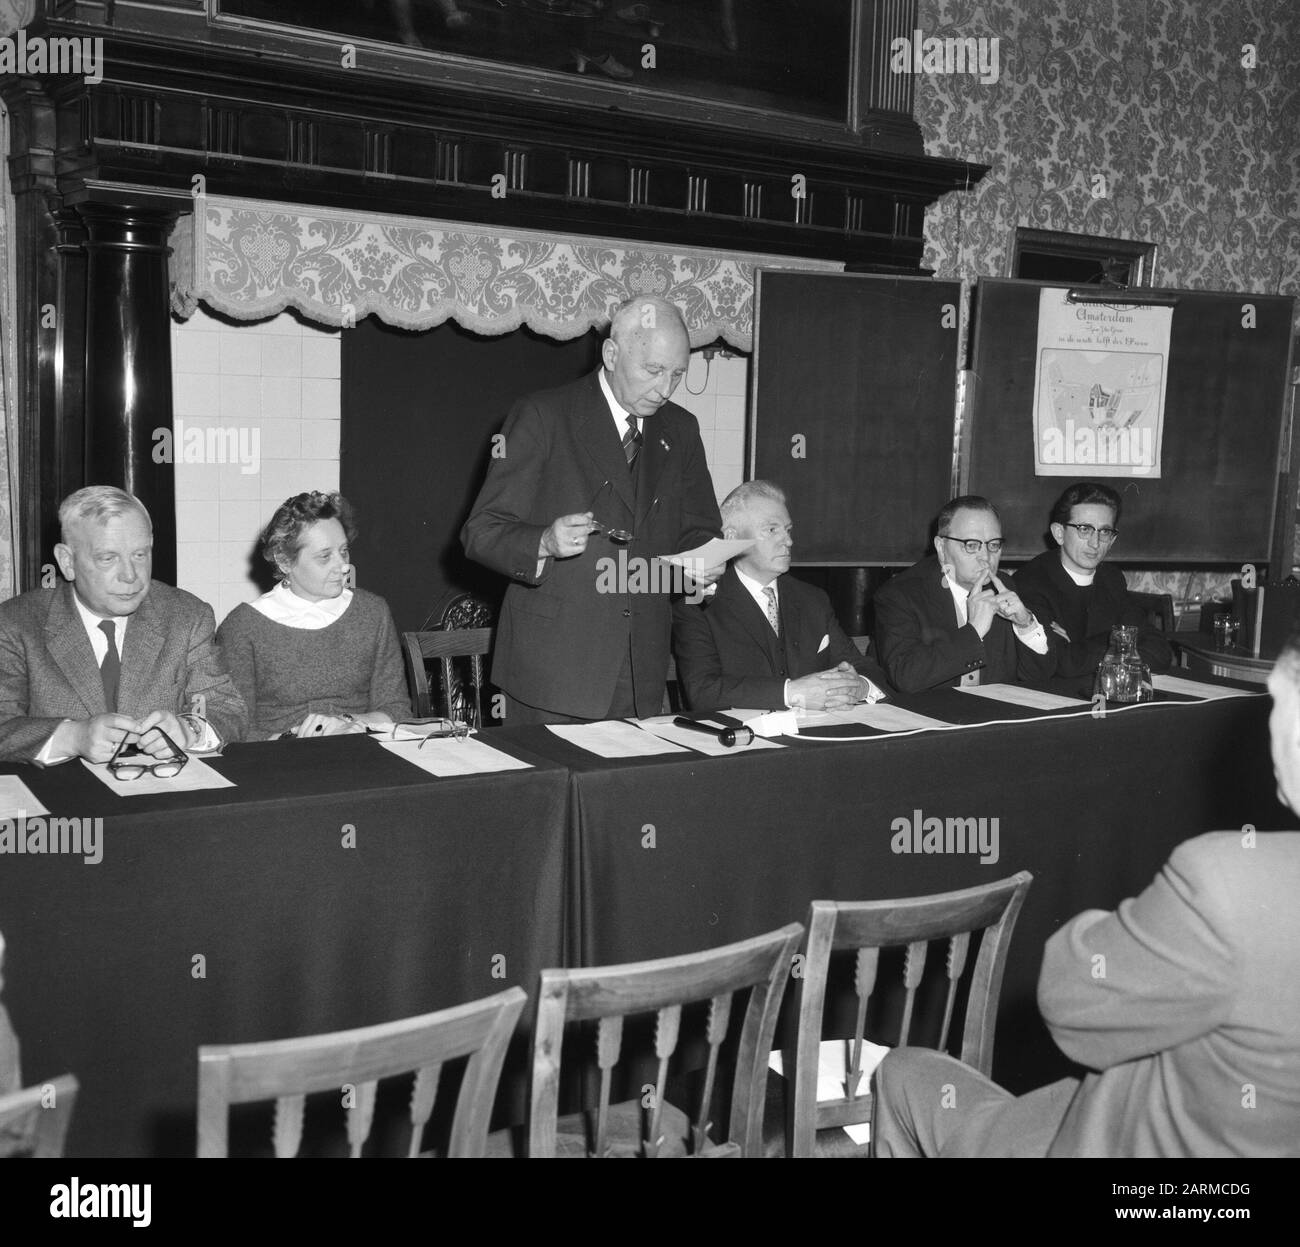 Symposium on Amsterdam and Rotterdam dialects in Amsterdam, v.l.n.r., pater J.J. Mittelmeijer, prof. dr. L.J. Rogier, dr. P.J. Meertens and [text aborted] Date: 2 January 1960 Location: Amsterdam, Noord-Holland Keywords: DIALECTES, SYMPOSIA Personal name: Meertens, P.J., Mittelmeijer, J.J., Rogier, L.J. Stock Photo